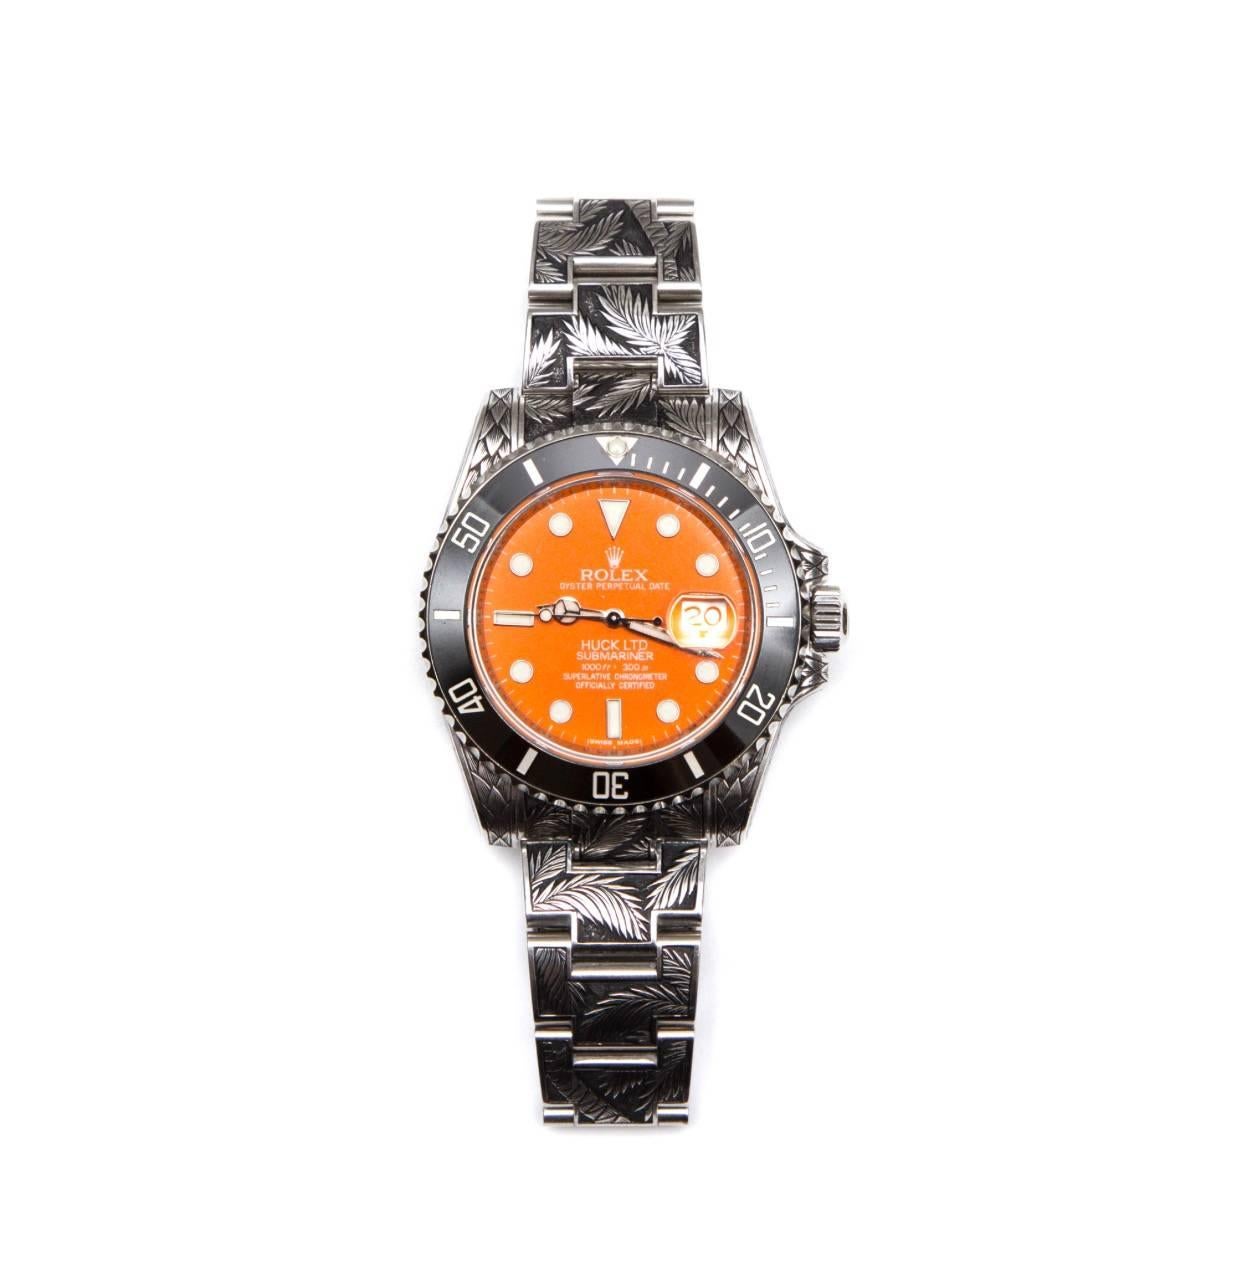 Huckleberry Ltd engraved Rolex Submariner with palm tree motif, hummingbird animal totem with white diamond eye, black bezel, custom Huckleberry orange dial and orange date-wheel, suede lined wooden box and lifetime warrantee.